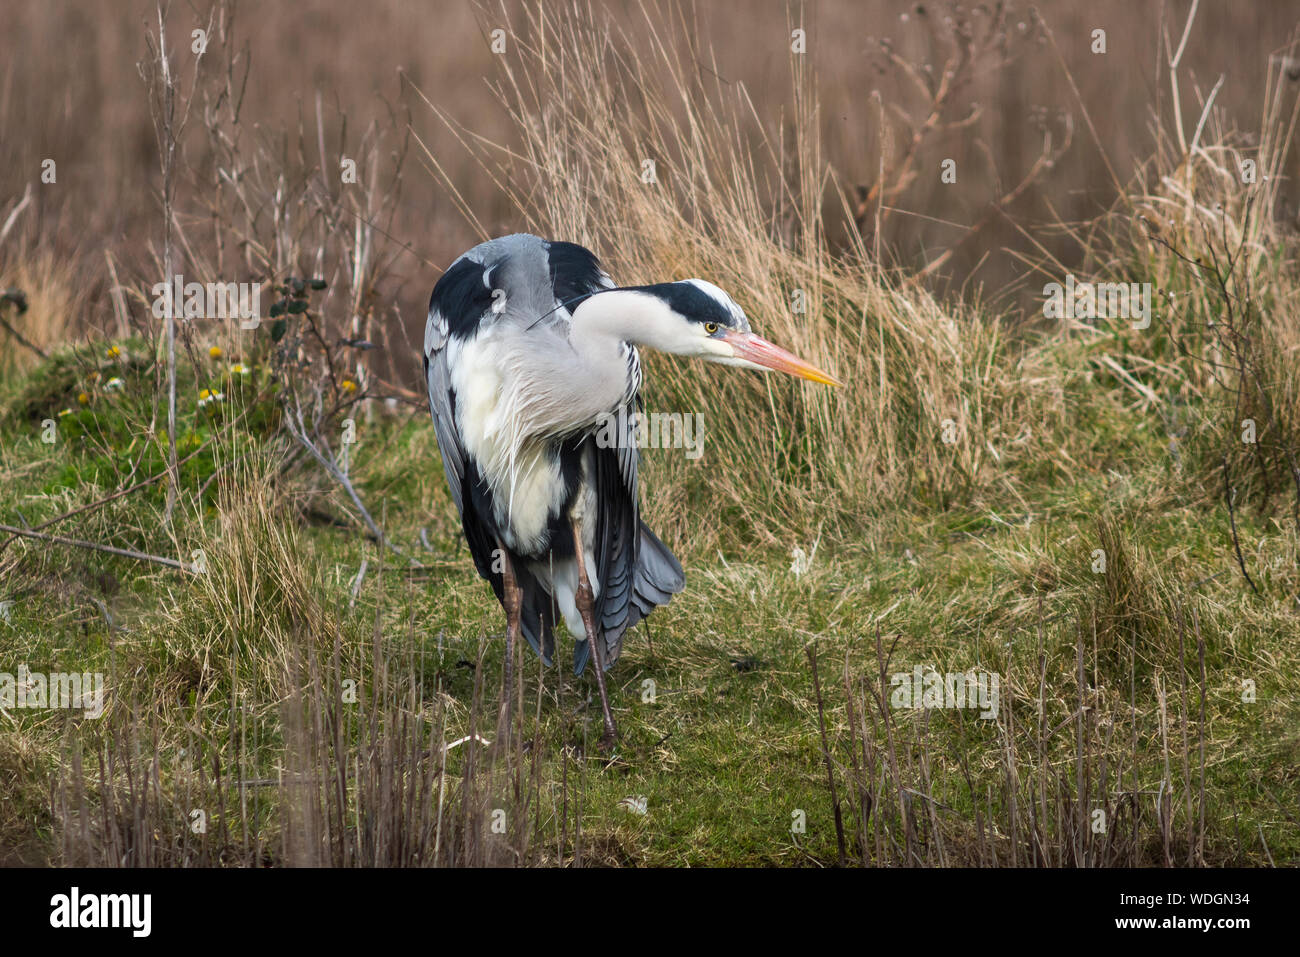 Heron strike, hunched down with head to one side Photo - Alamy